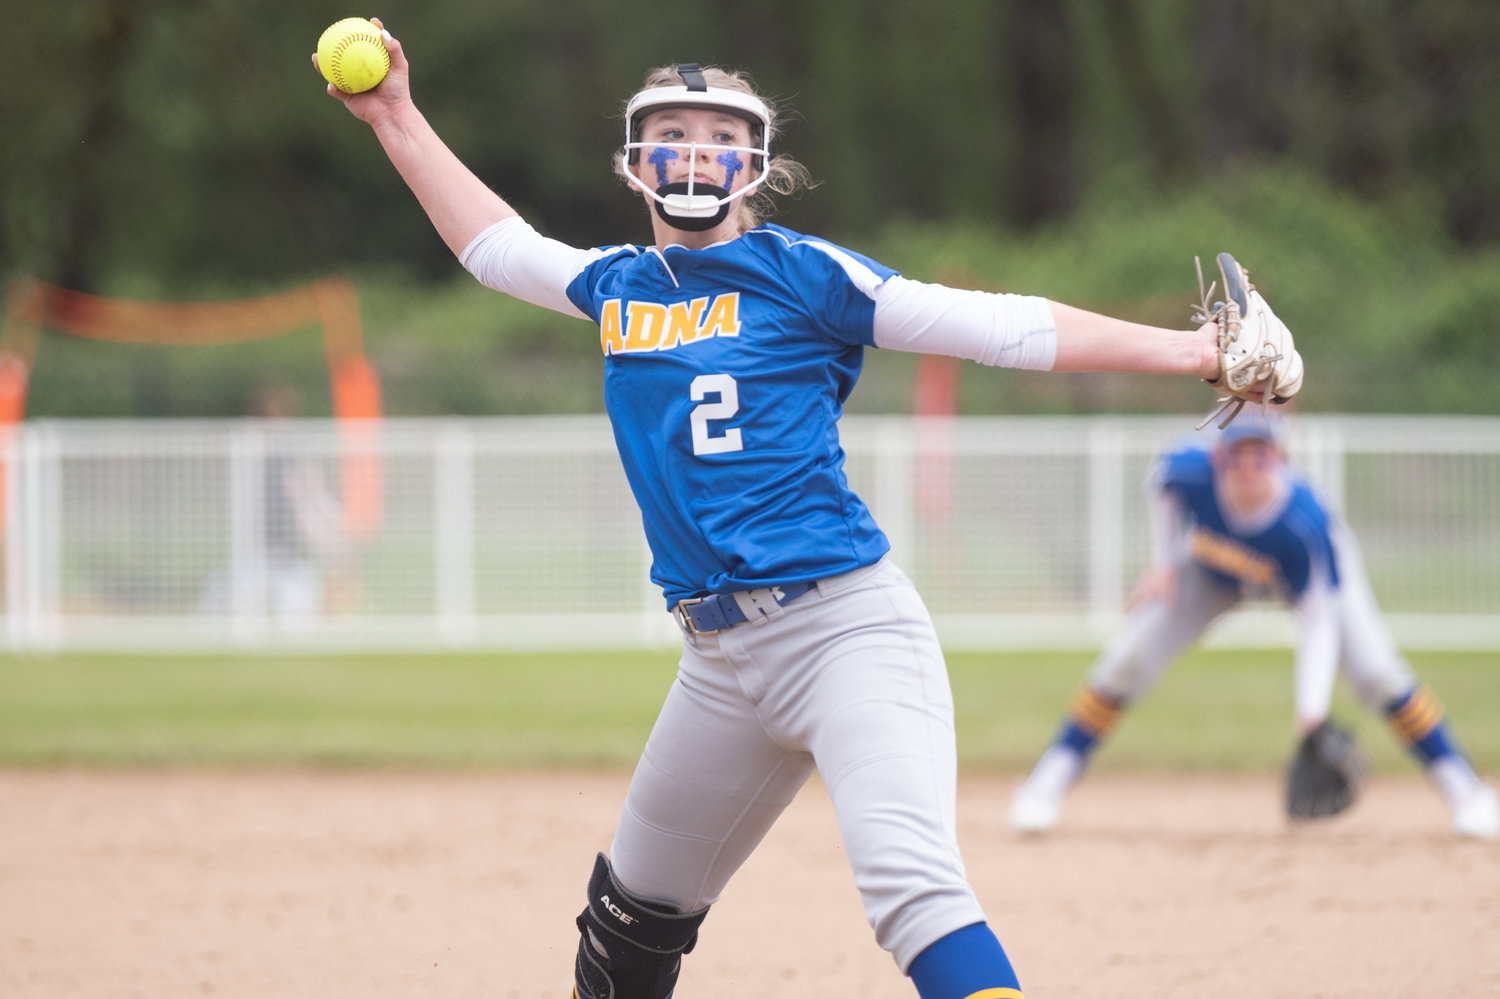 Adna's Ava Simms winds up to deliver a pitch against Toutle Lake in the 2B District 4 tournament at Fort Borst Park May 20.